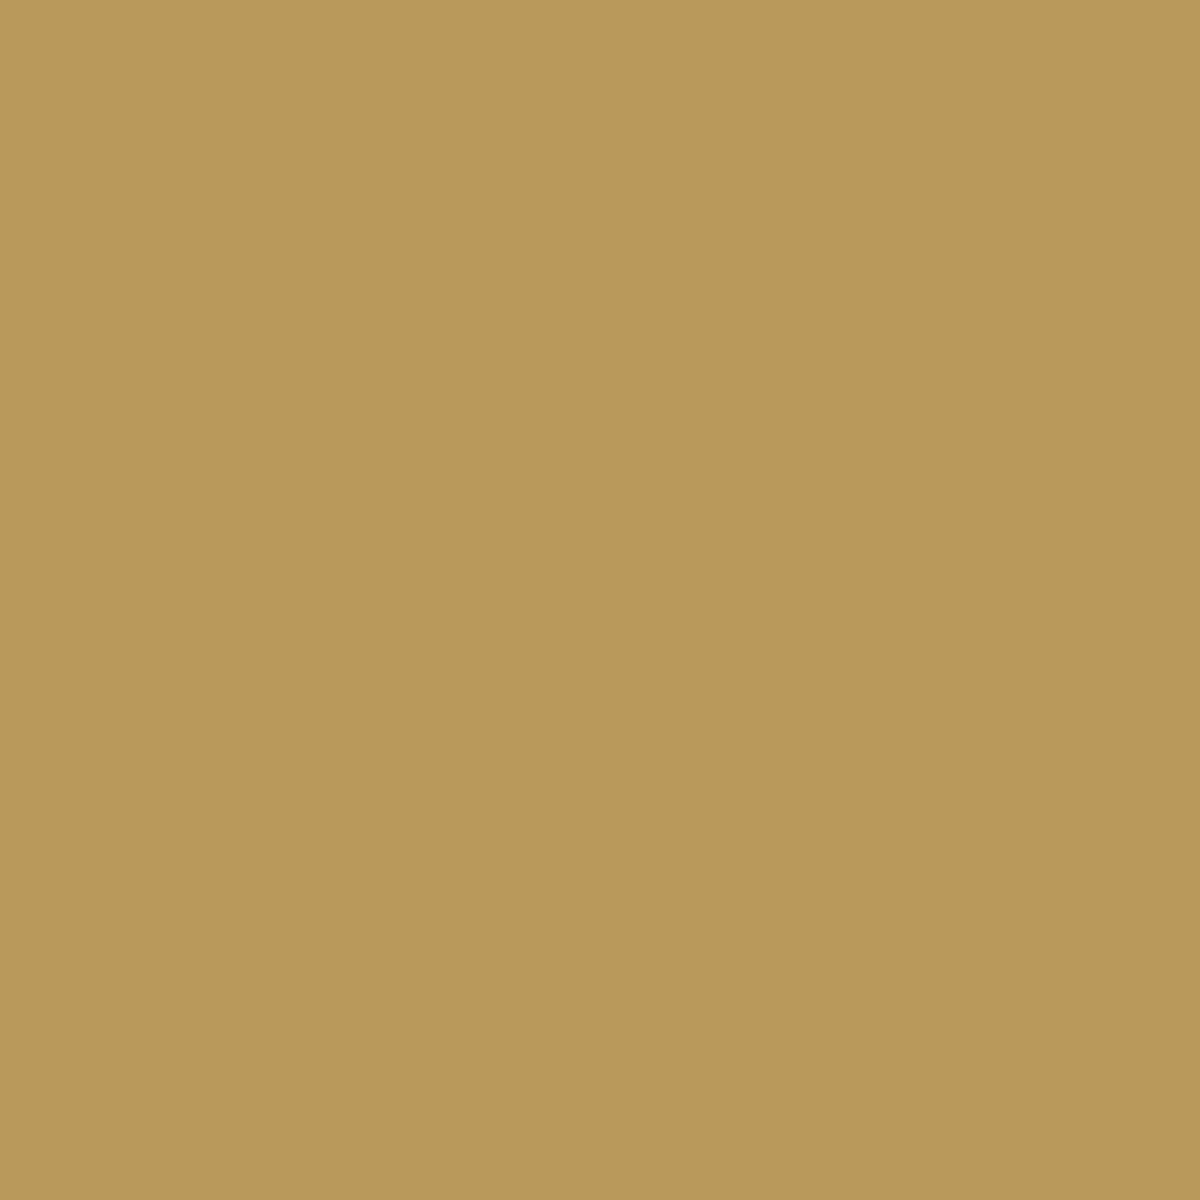 Download 223 El Sereno Gold - Paint Color | Expressions on King